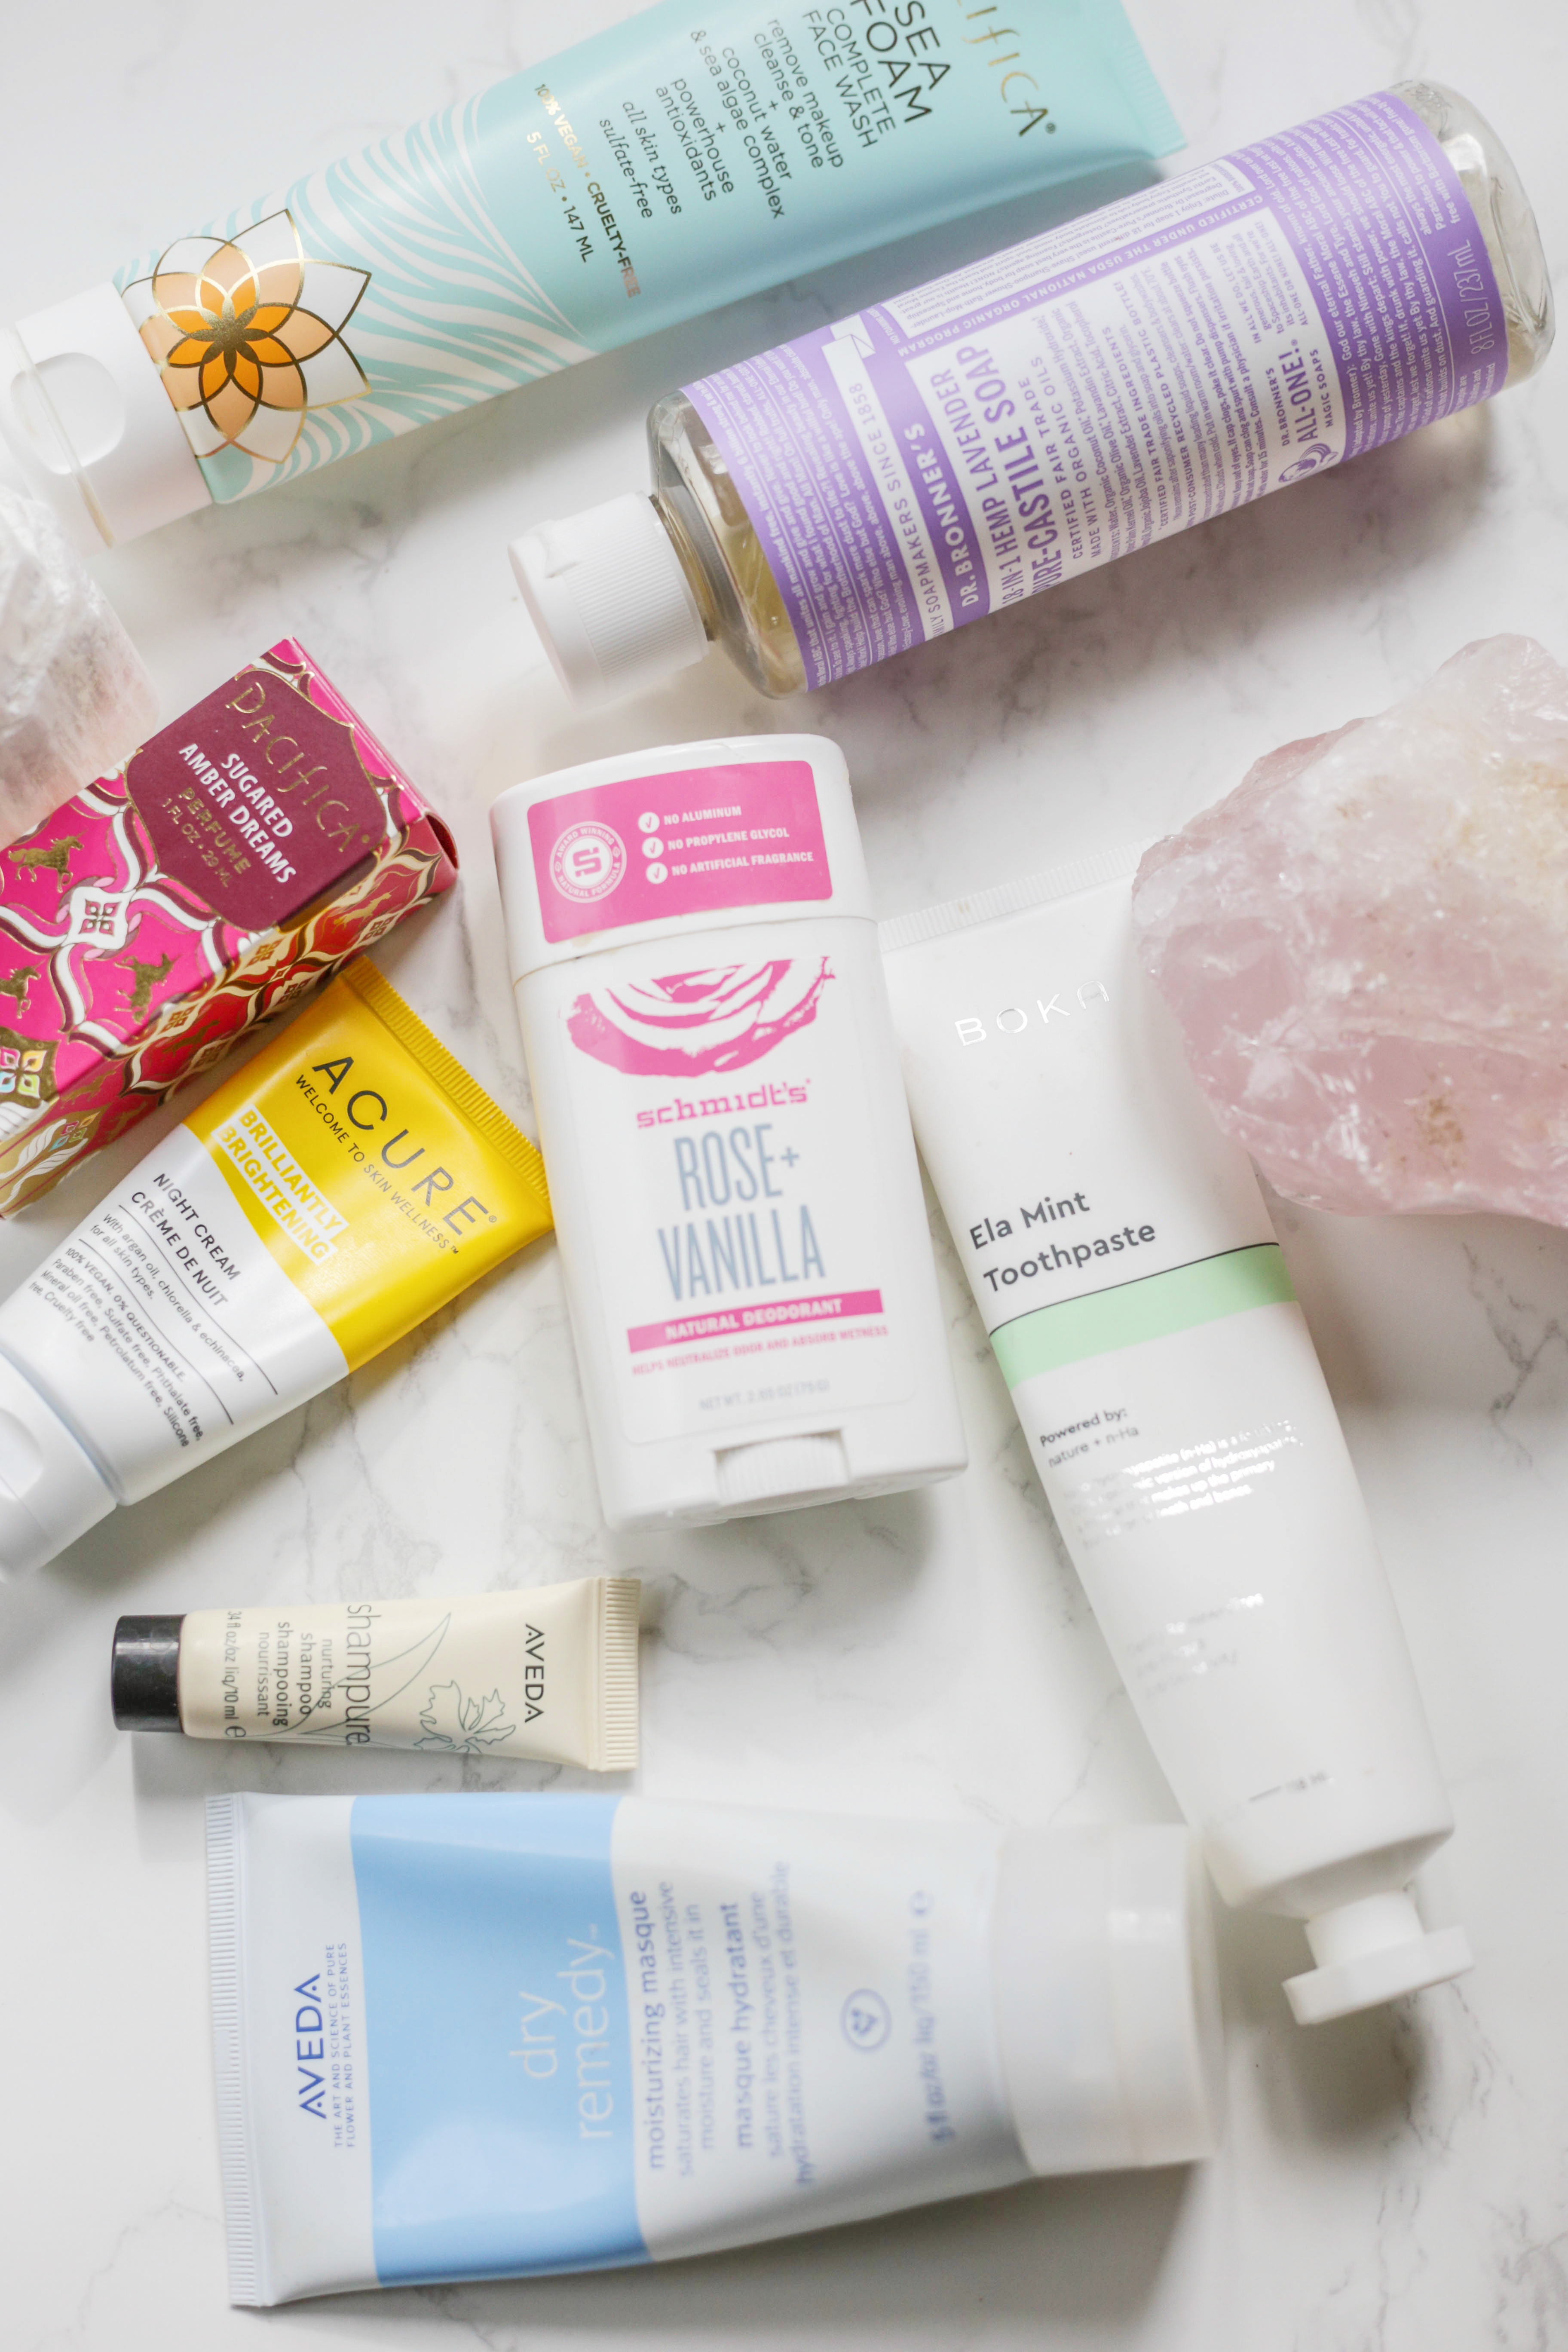 Naturally Derived Personal Care Products I’m Loving